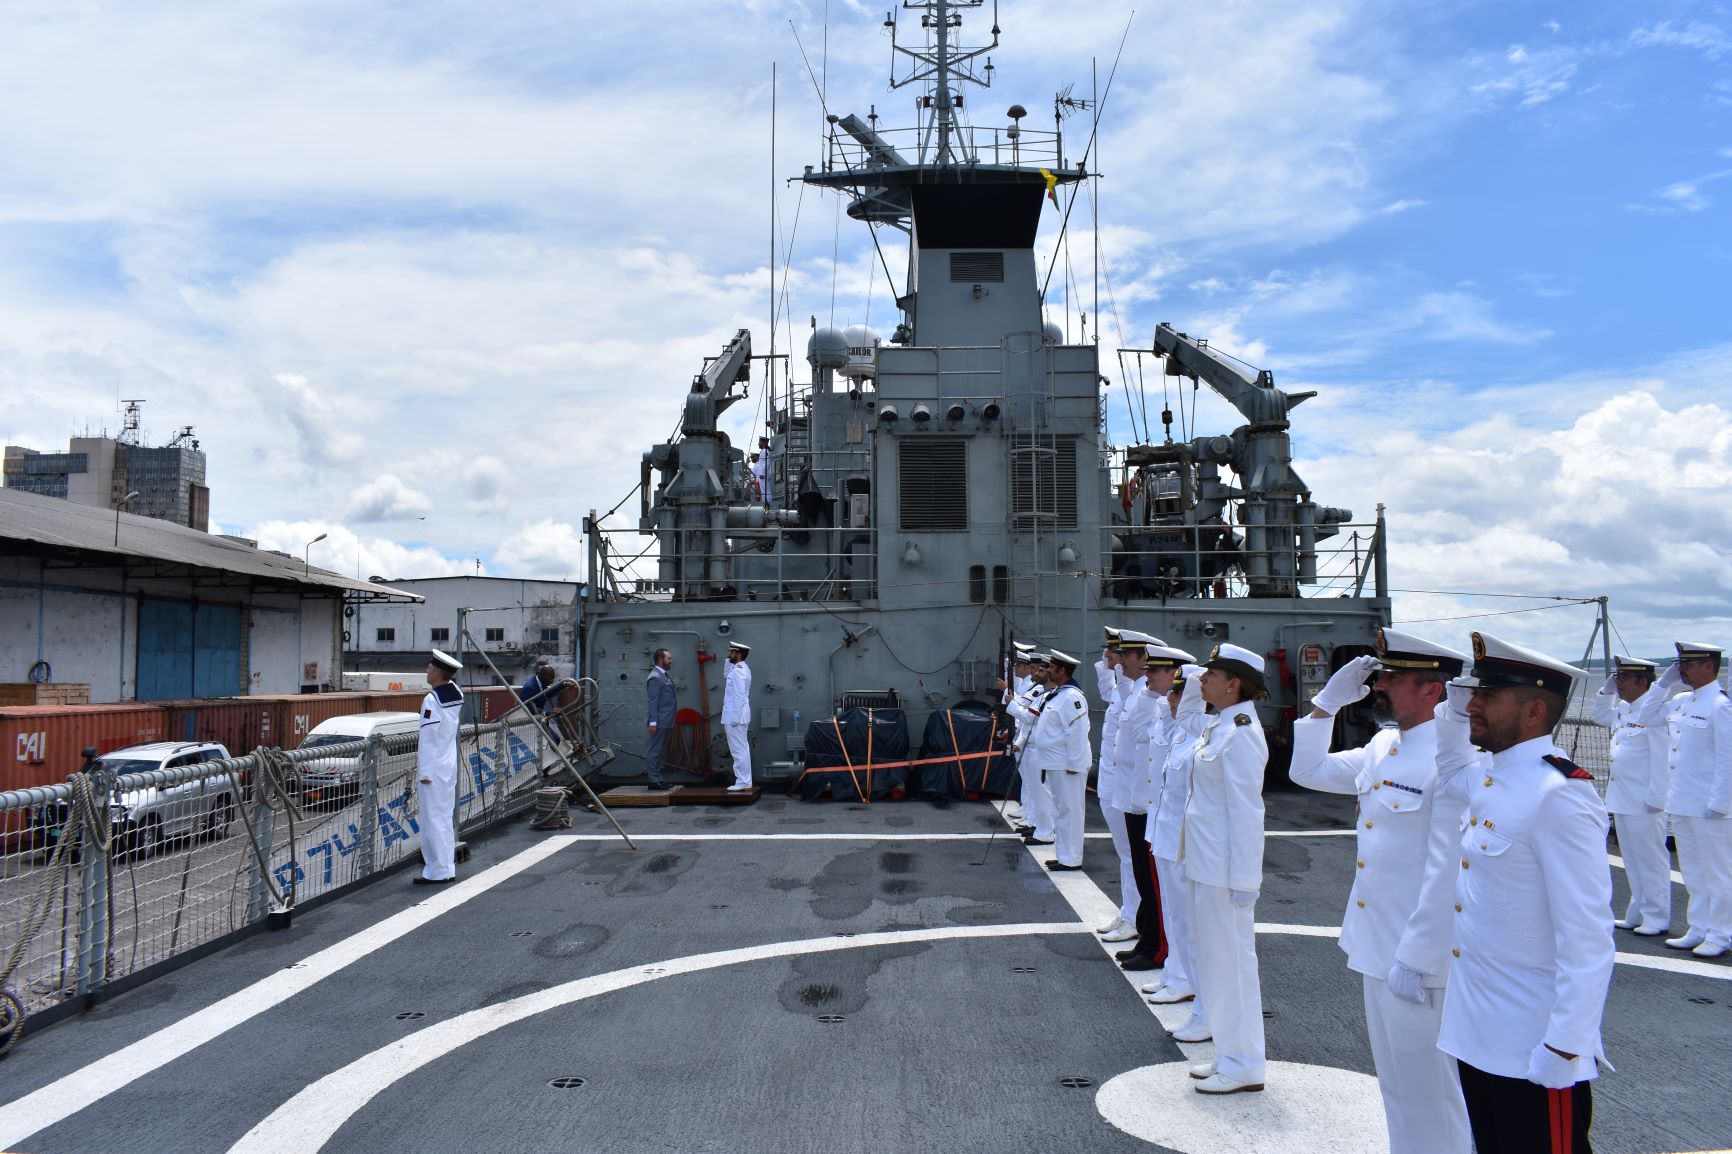 The patrol boat “Atalaya” collaborates with the Cameroon Armed Forces in Douala